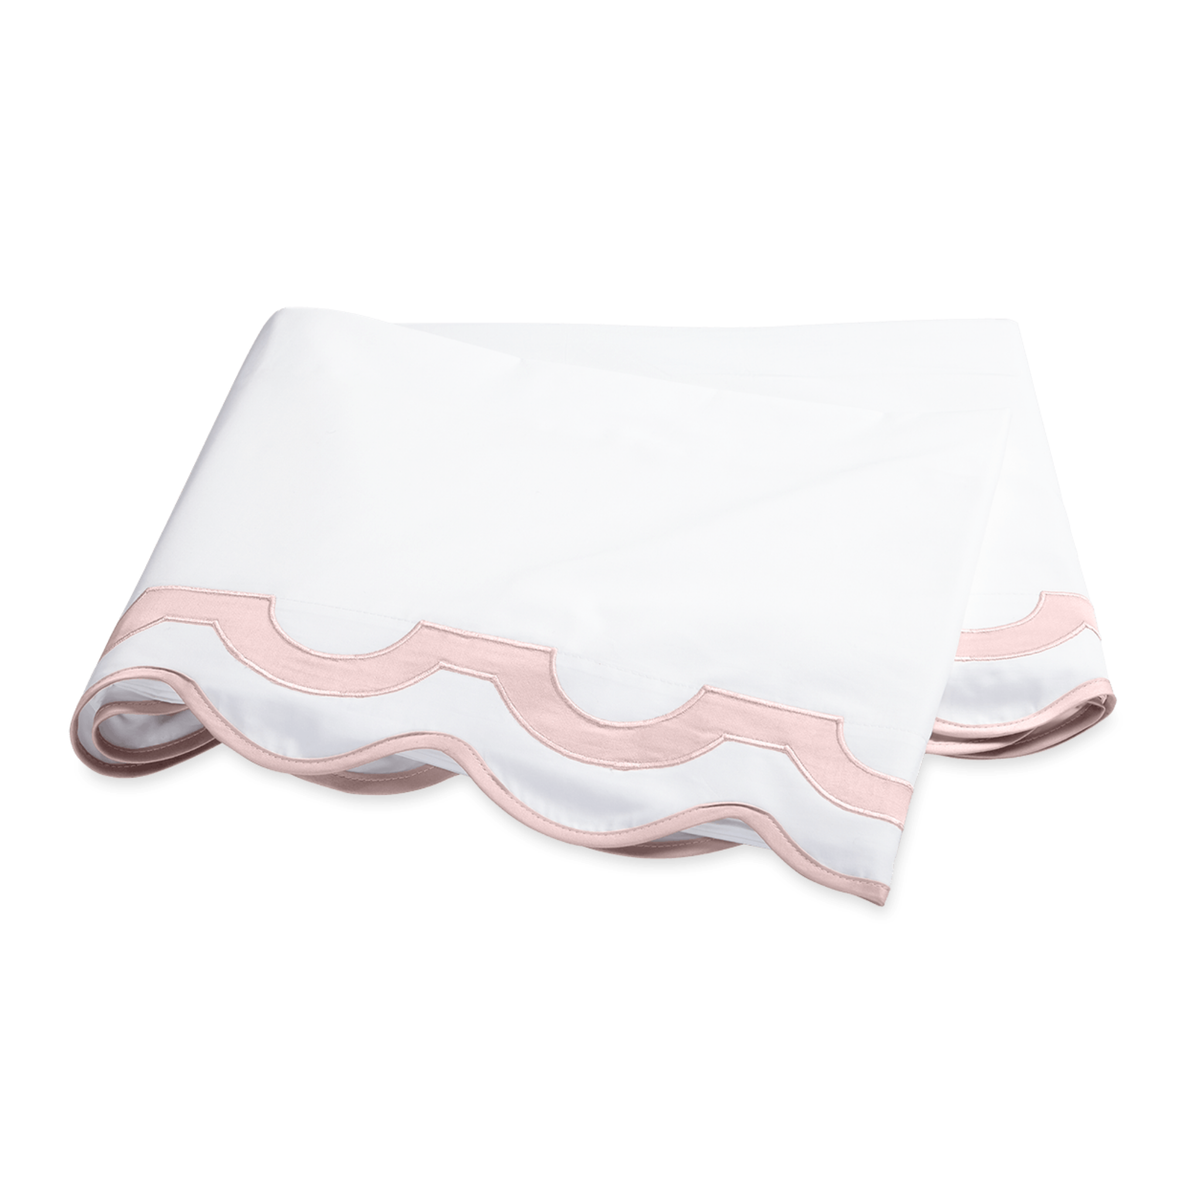 Folded Flat Sheet of Matouk Mirasol Collection in Pink Color